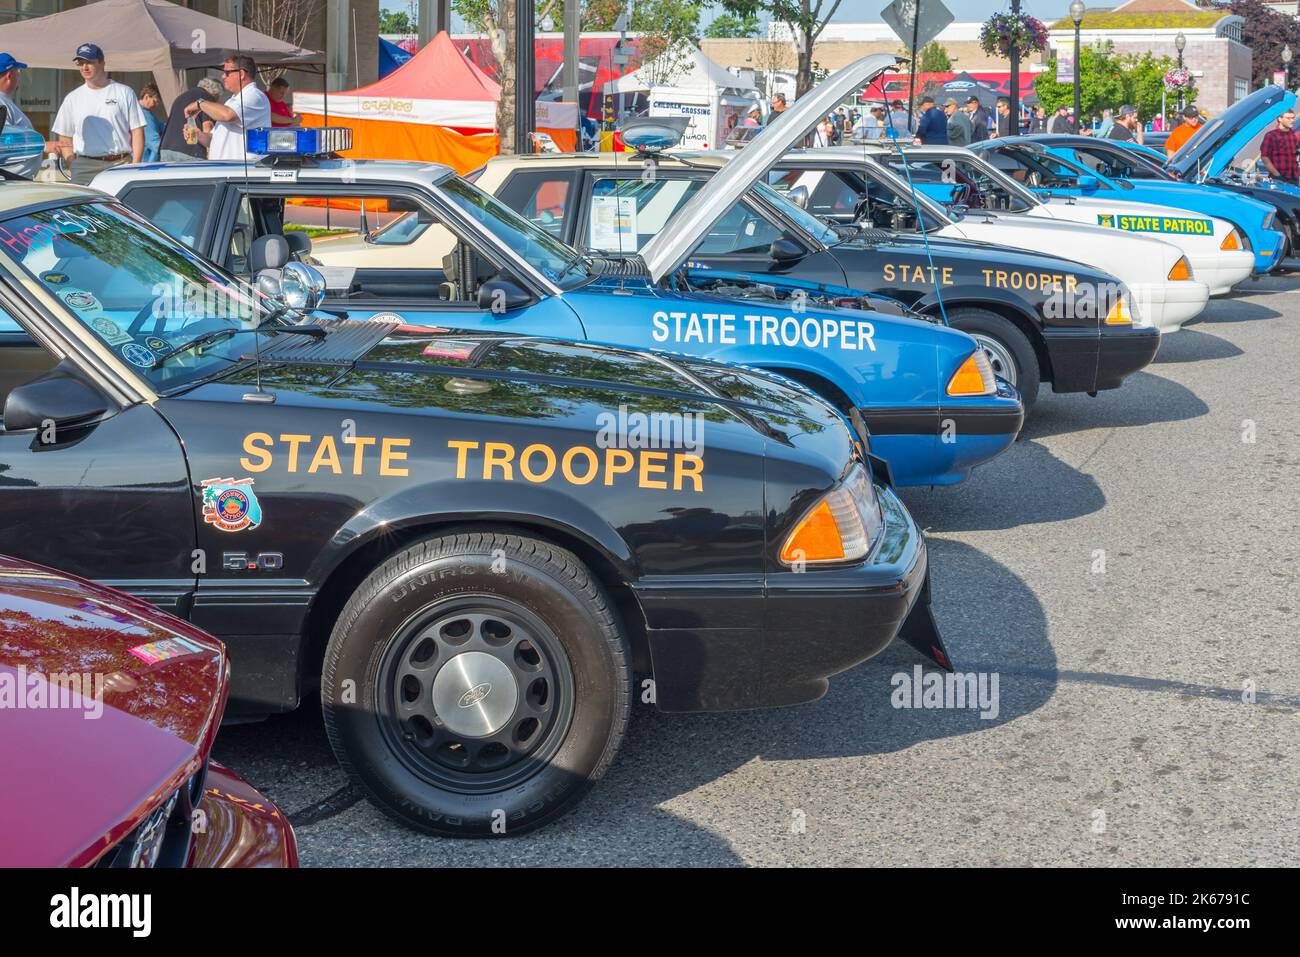 FERNDALE, MI/USA - AUGUST 16, 2014: Five police cruiser / State Trooper cars at the Emergency Vehicle Show, Woodward Dream Cruise. Stock Photo